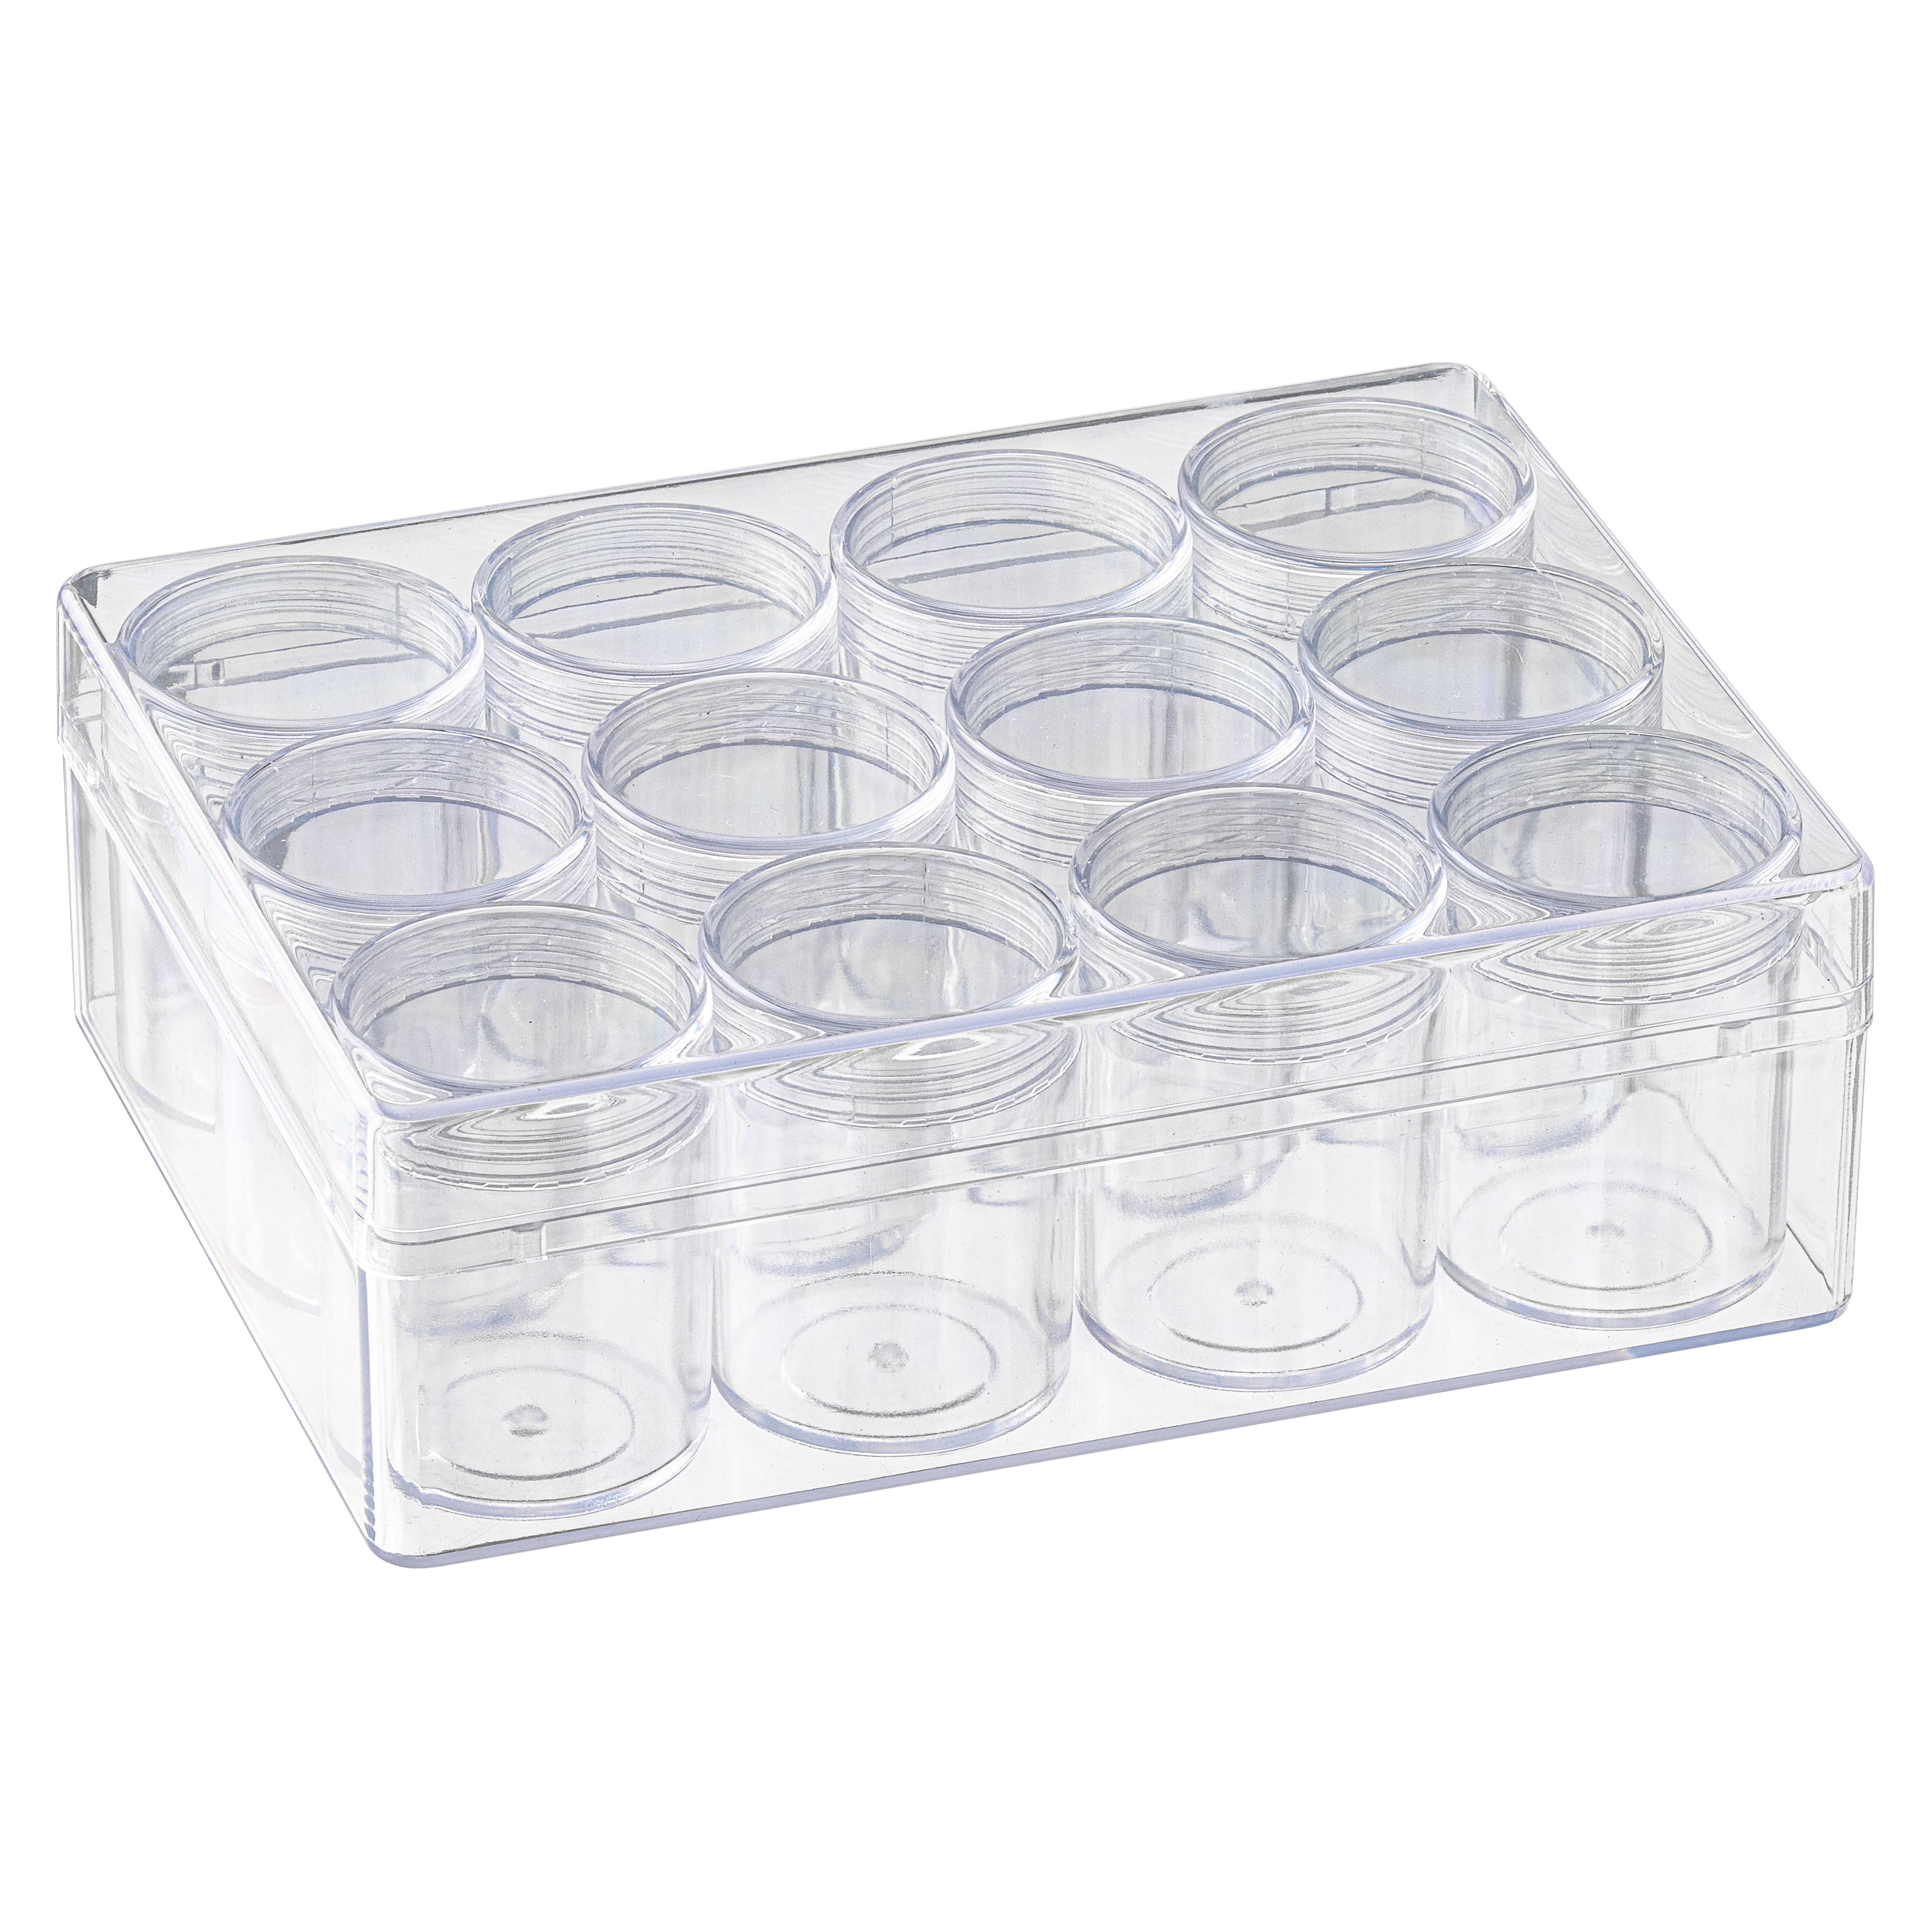 Lihua 3 Layers 18 Compartments Clear Storage Box Container Jewelry Bead Organizer Case, Black